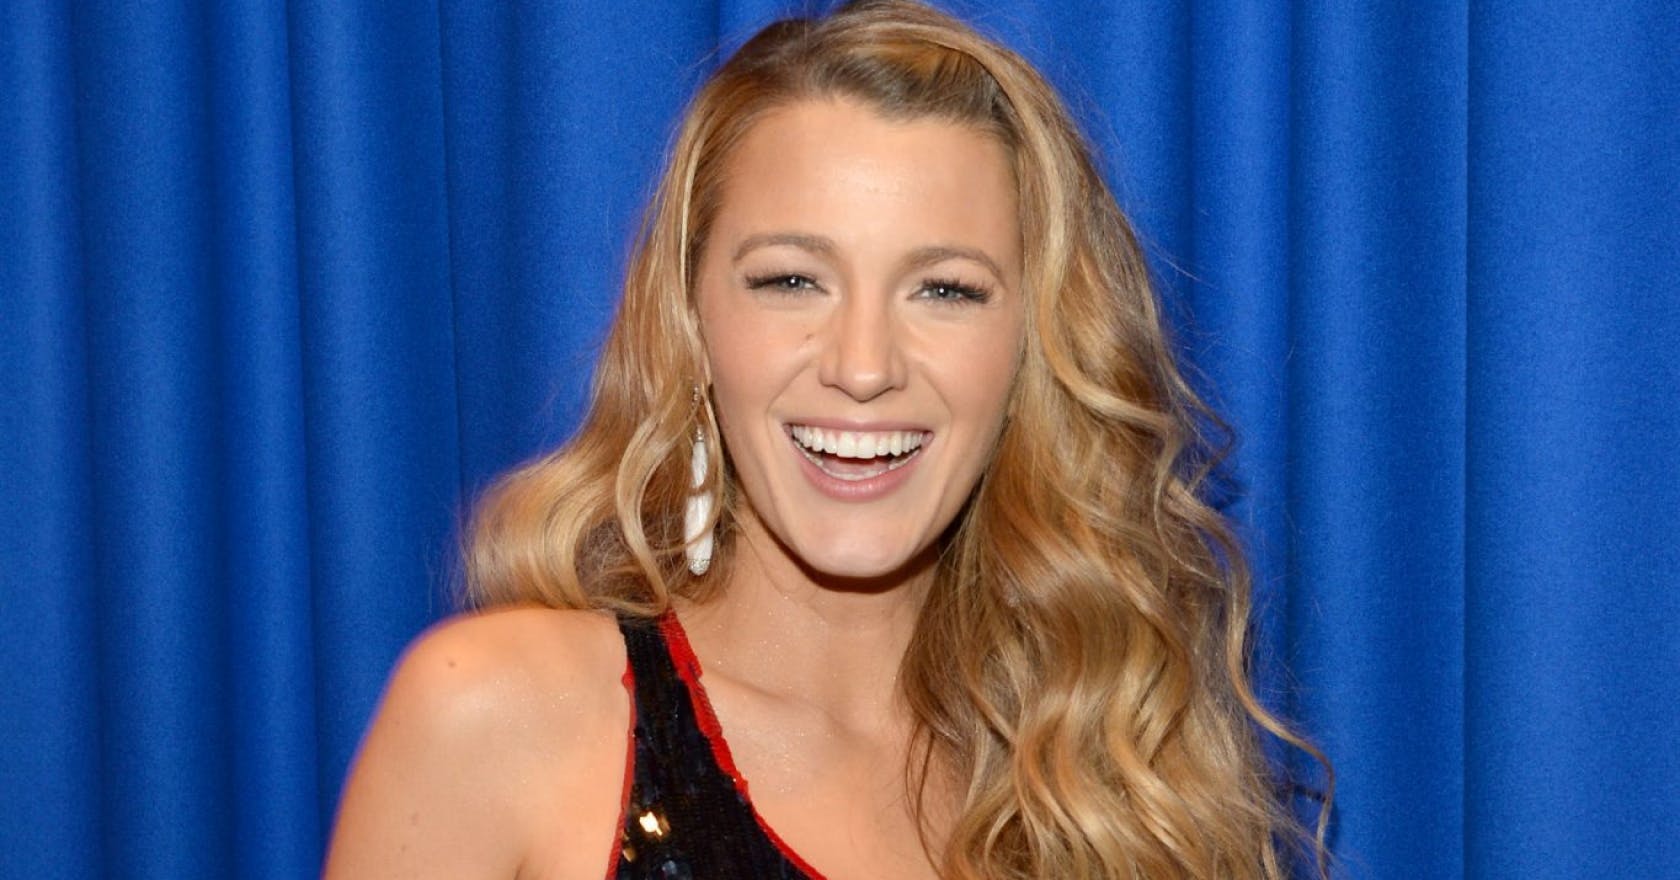 Blake Lively releases two new songs for All I See Is You soundtrack